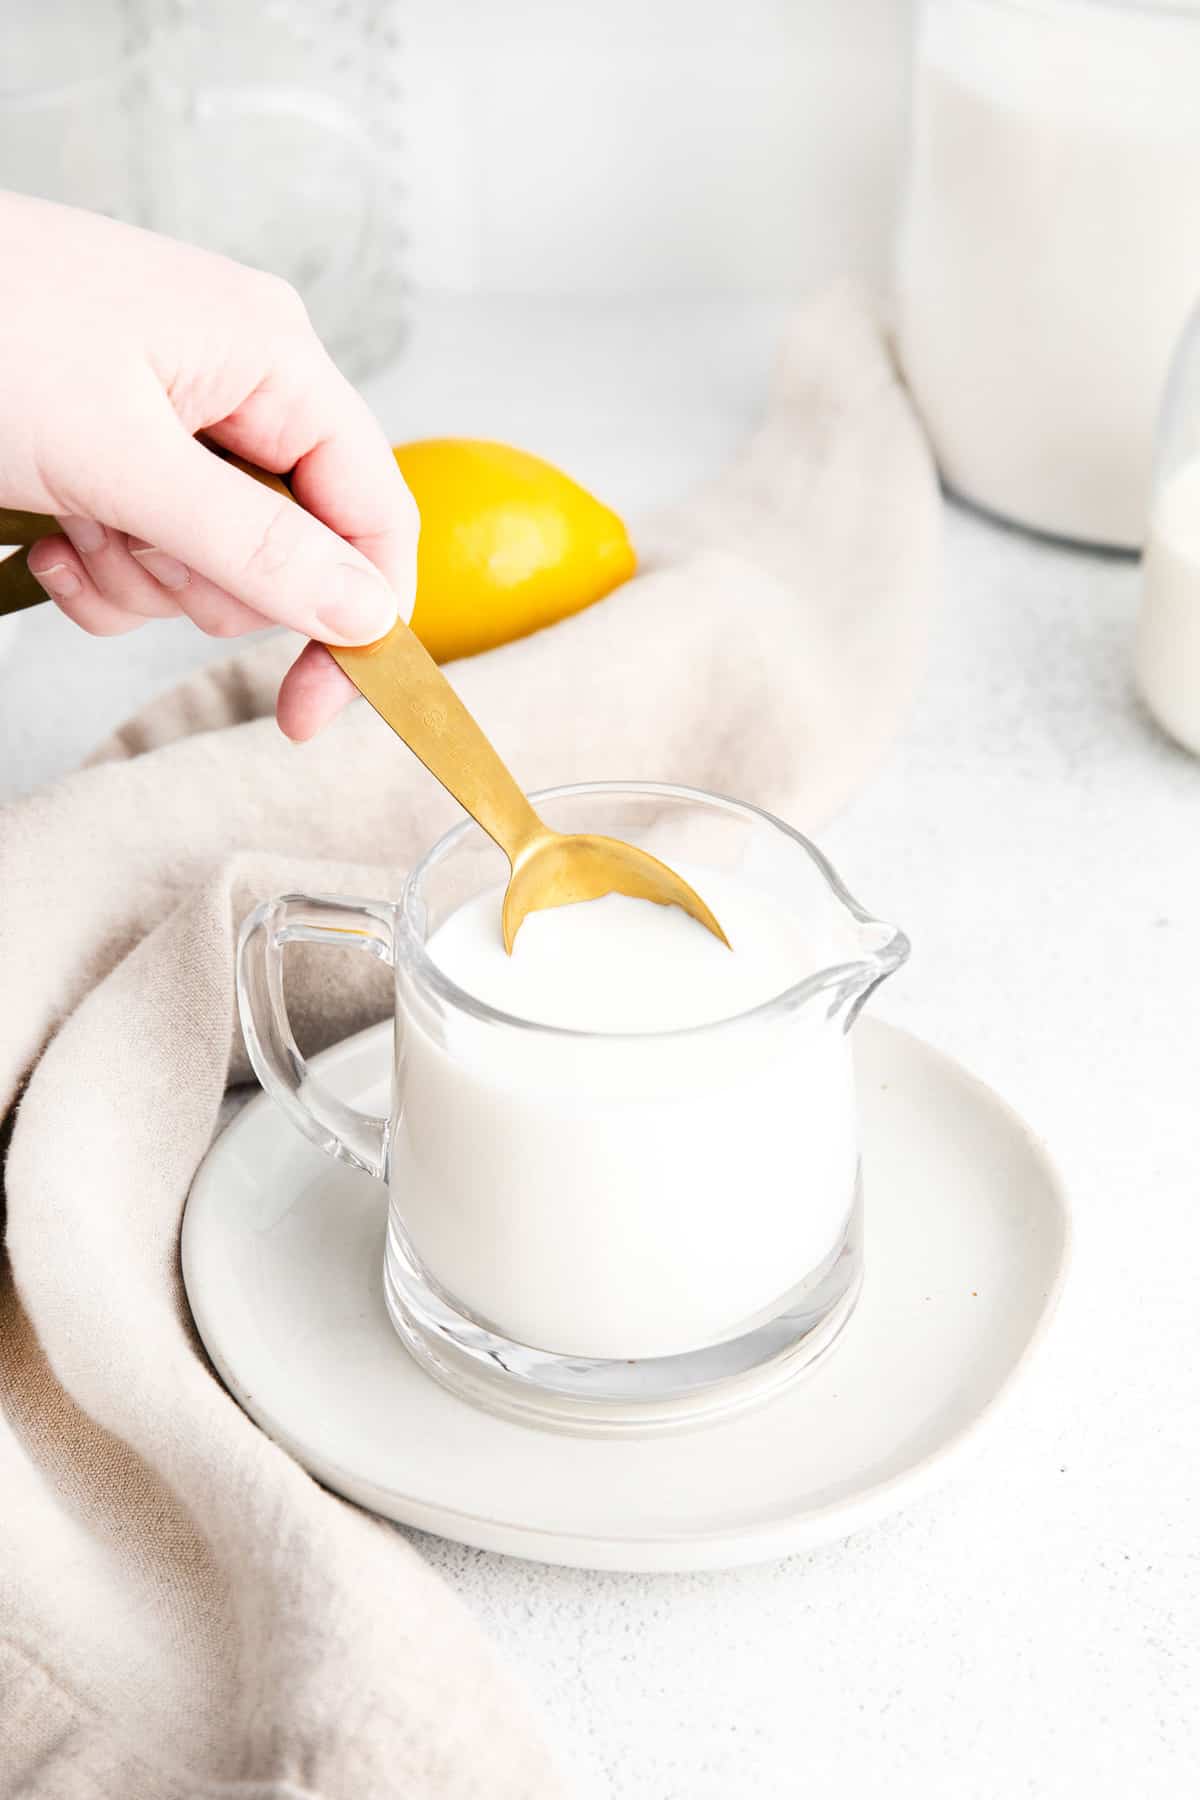 Measuring spoon being dipped into a small glass pitcher of milk.